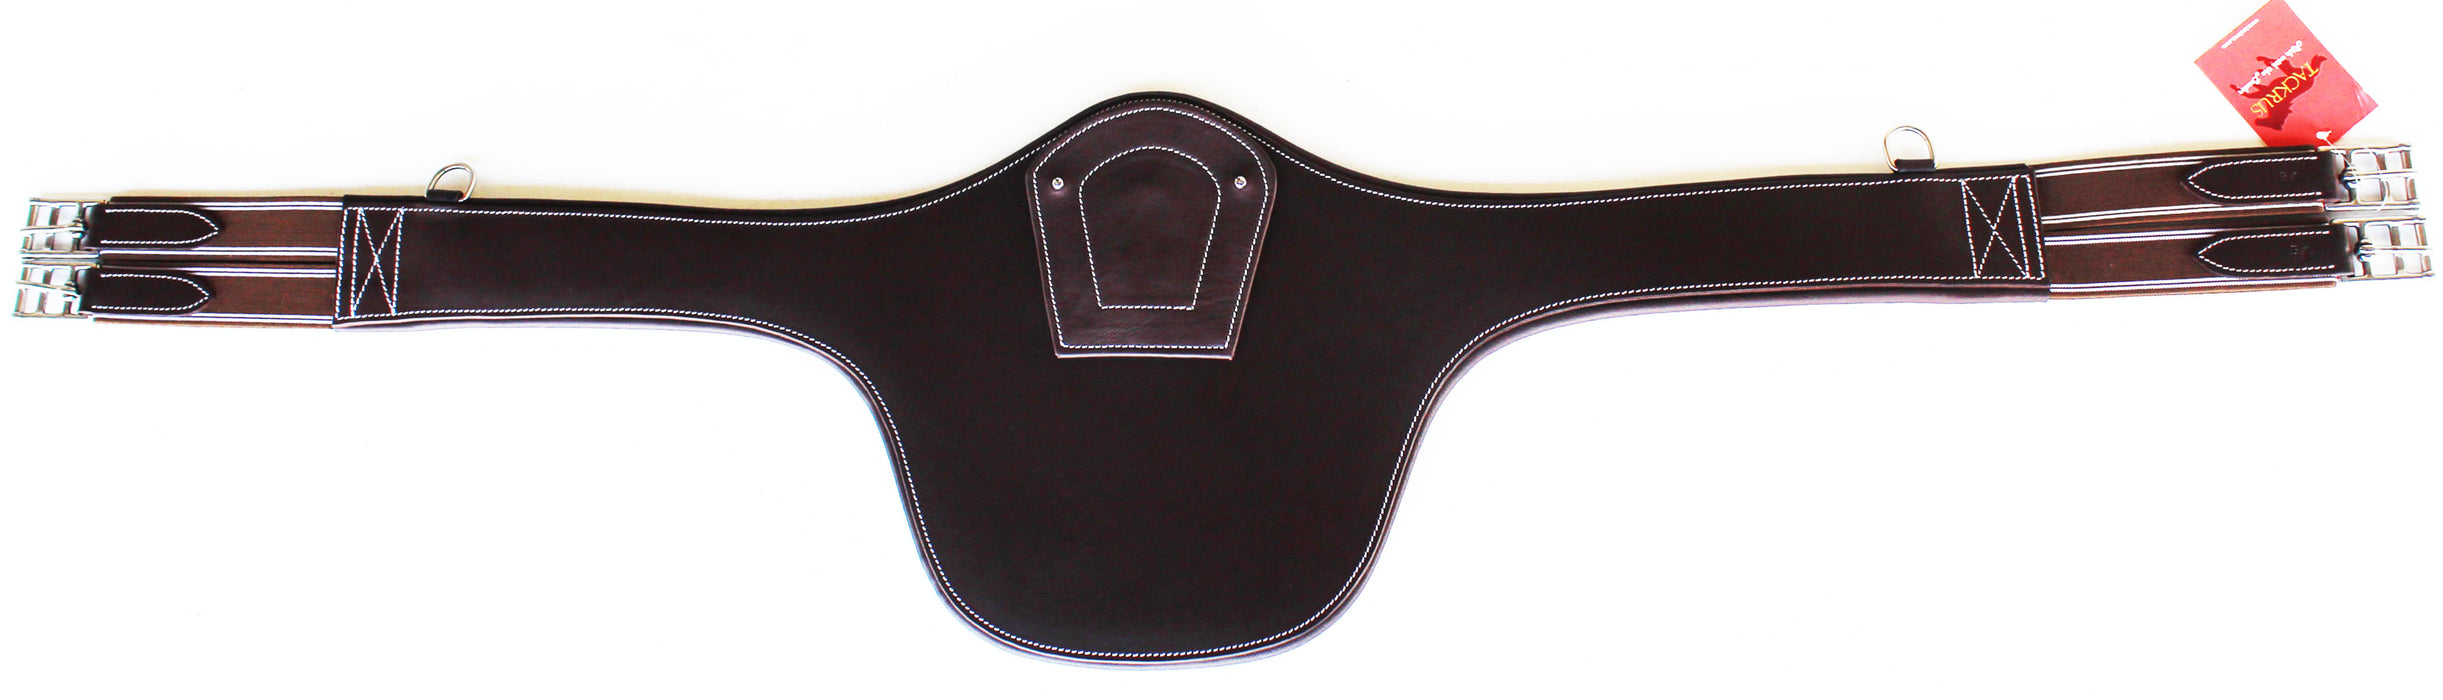 Horse English Leather belly Girth-Reinforced Nylon Riding 97316